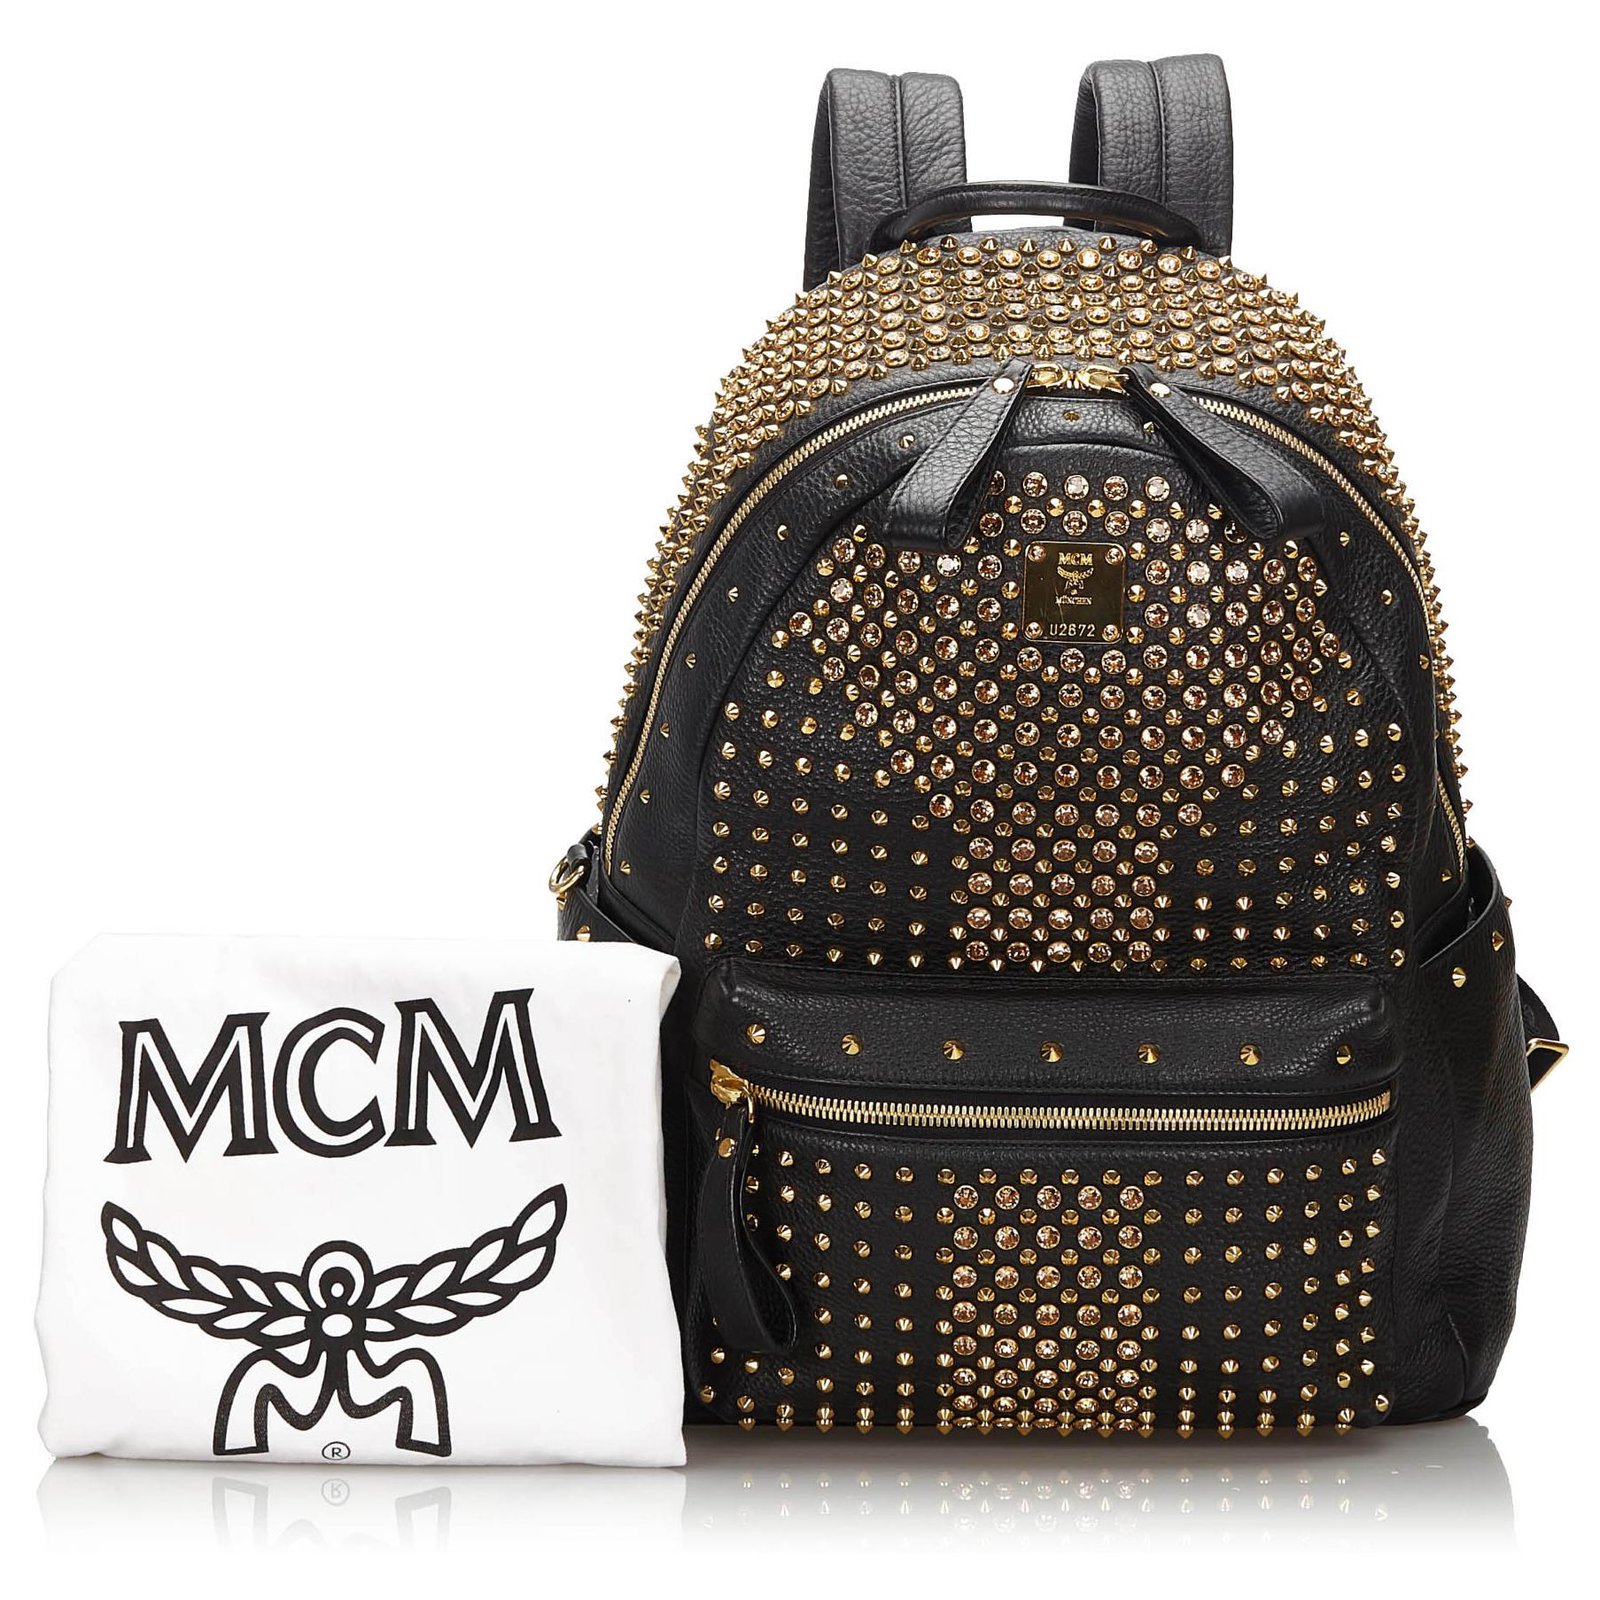 Stark leather backpack MCM Black in Leather - 36143342